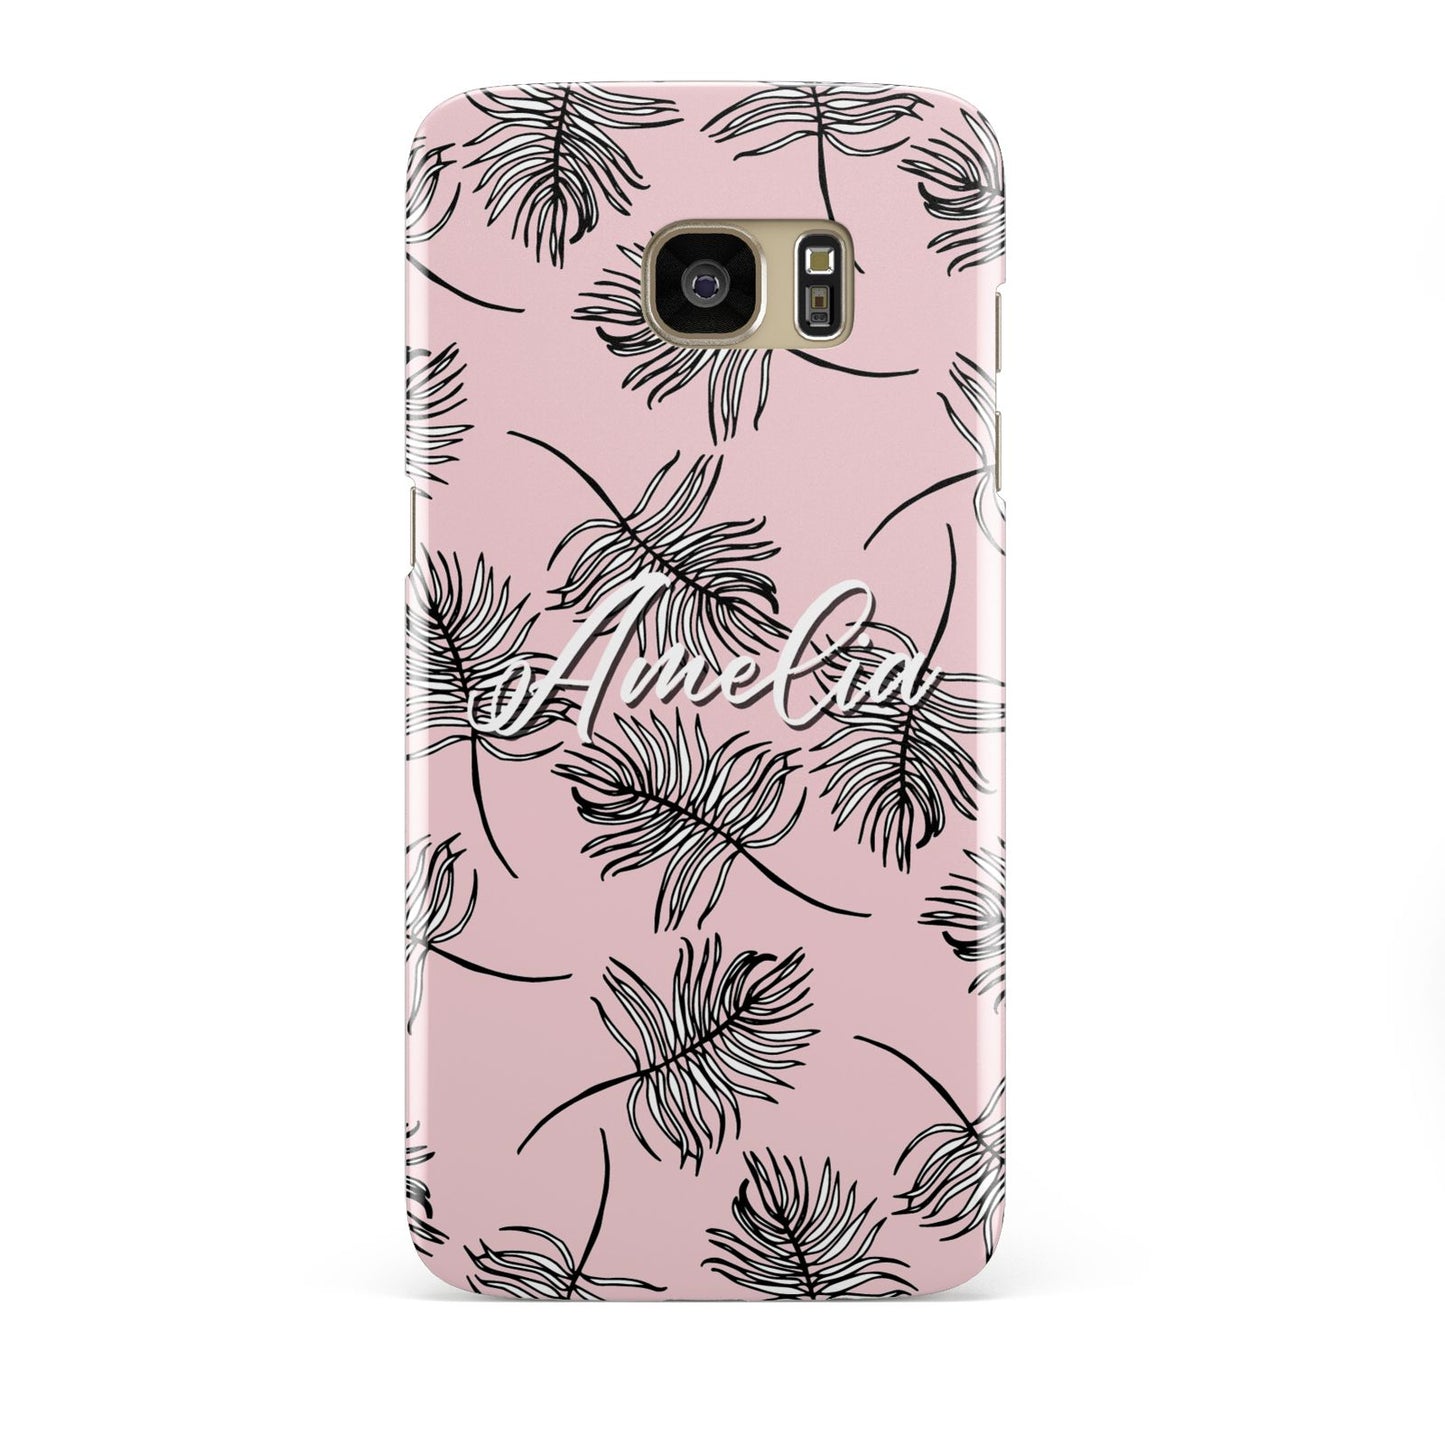 Personalised Pink Monochrome Tropical Leaf Samsung Galaxy S7 Edge Case